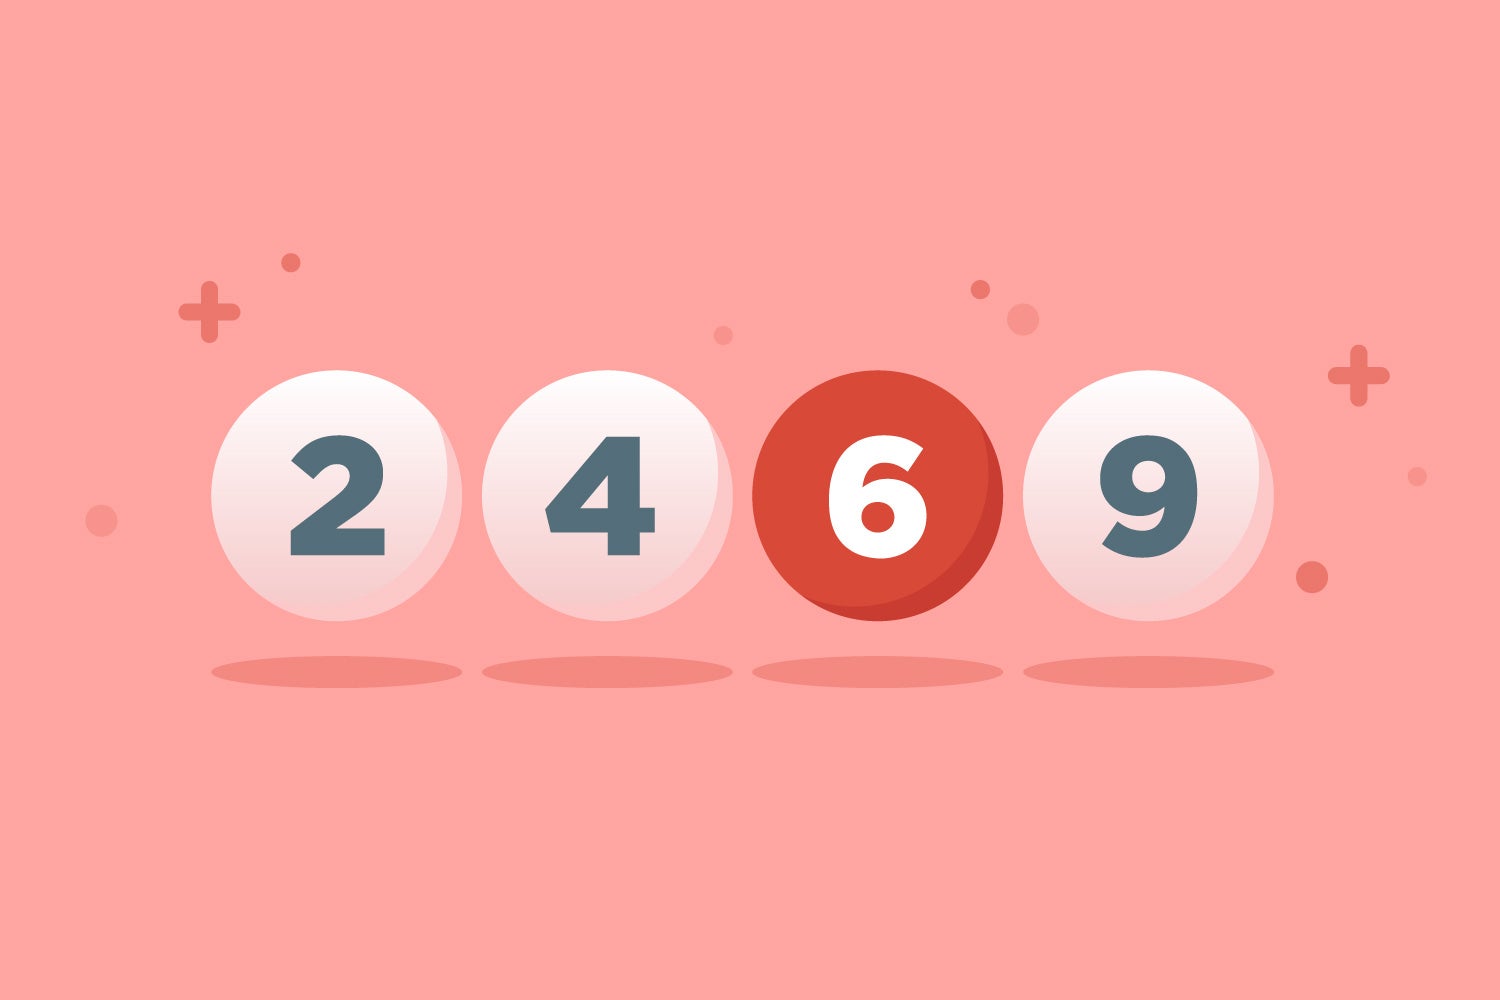 Are Powerball Numbers the Same in All States?